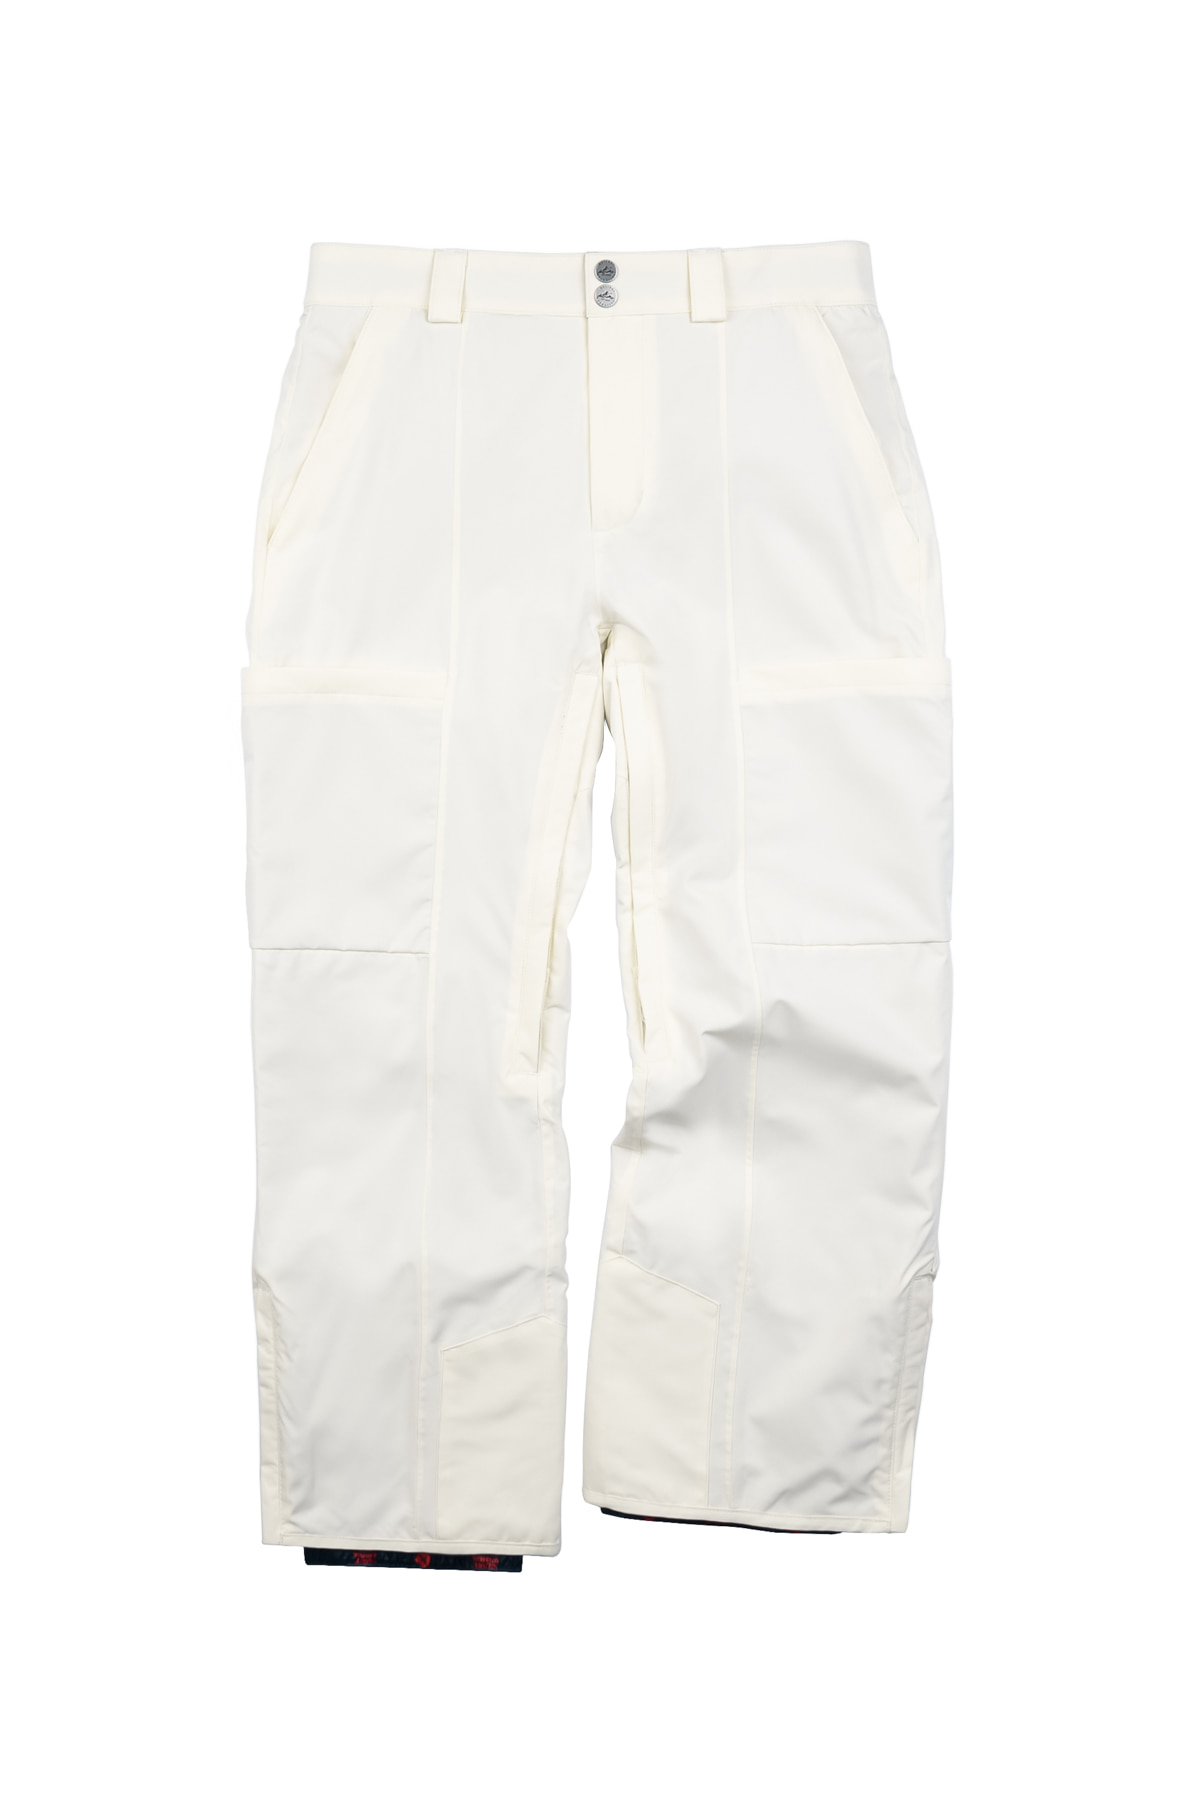 UNIT 2L PANTS[2layer]-BUTTER CREAMHOLIDAY OUTERWEAR